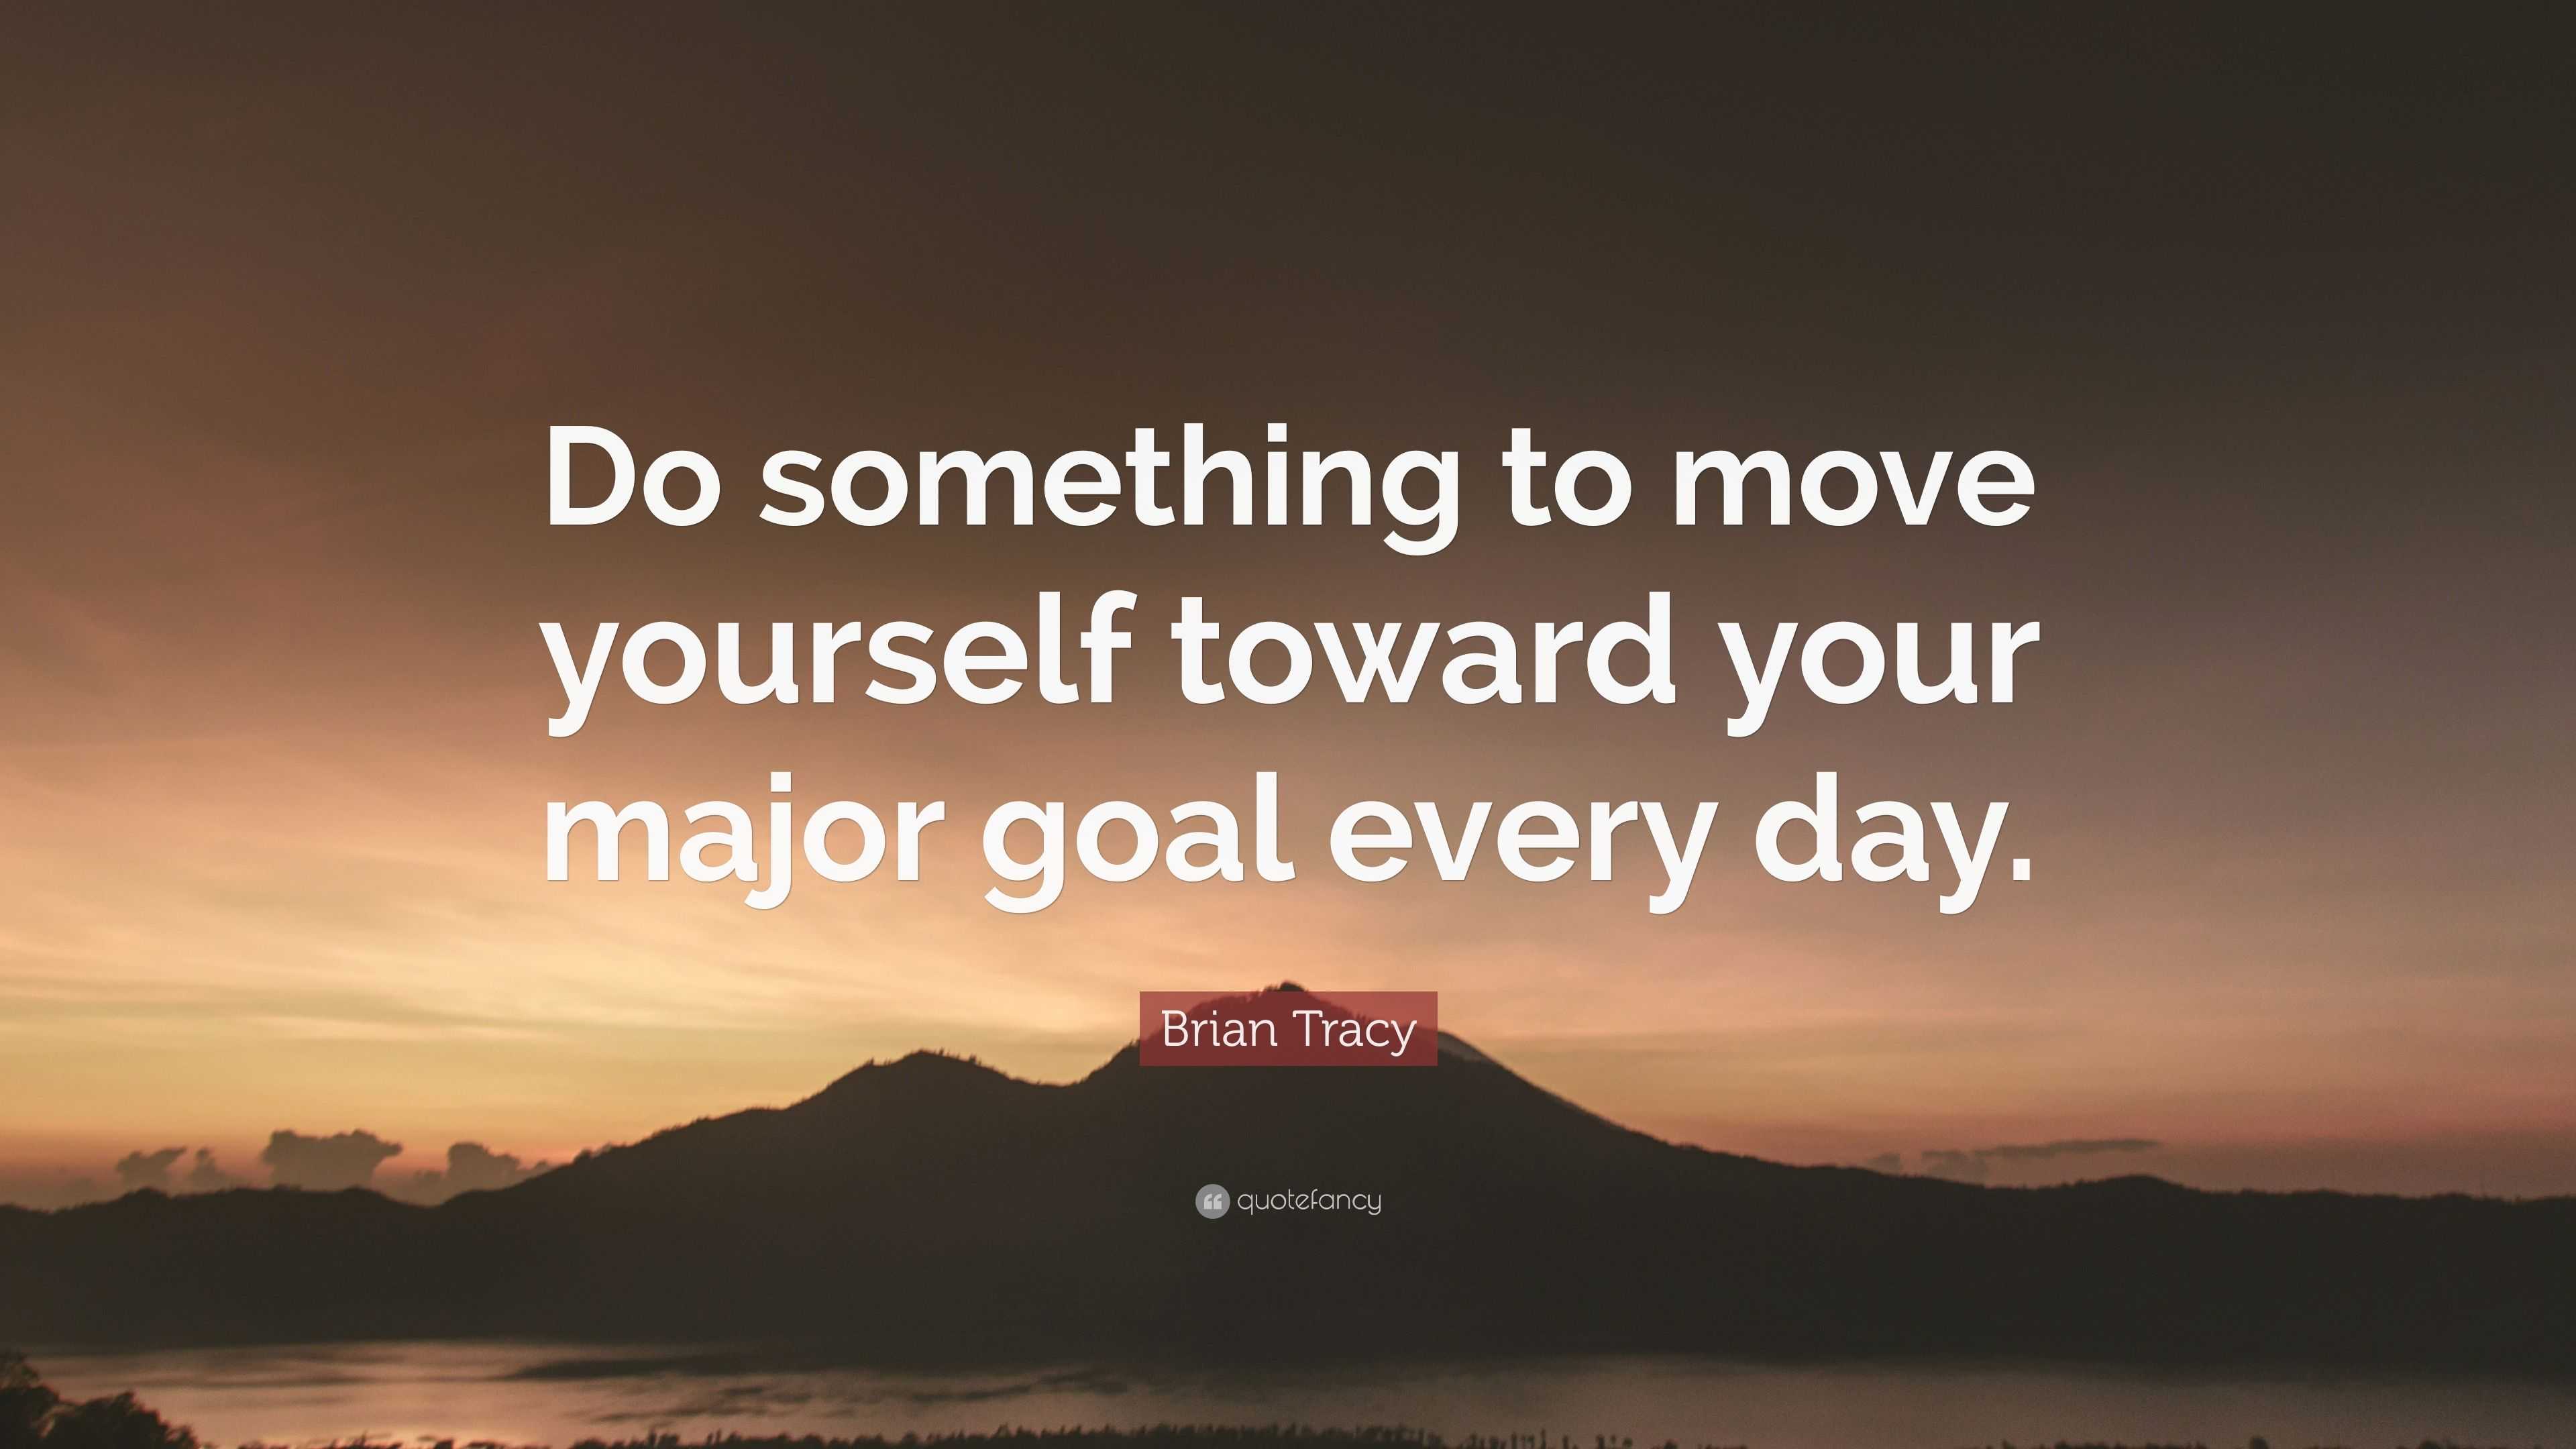 Brian Tracy Quote: “Do something to move yourself toward your major